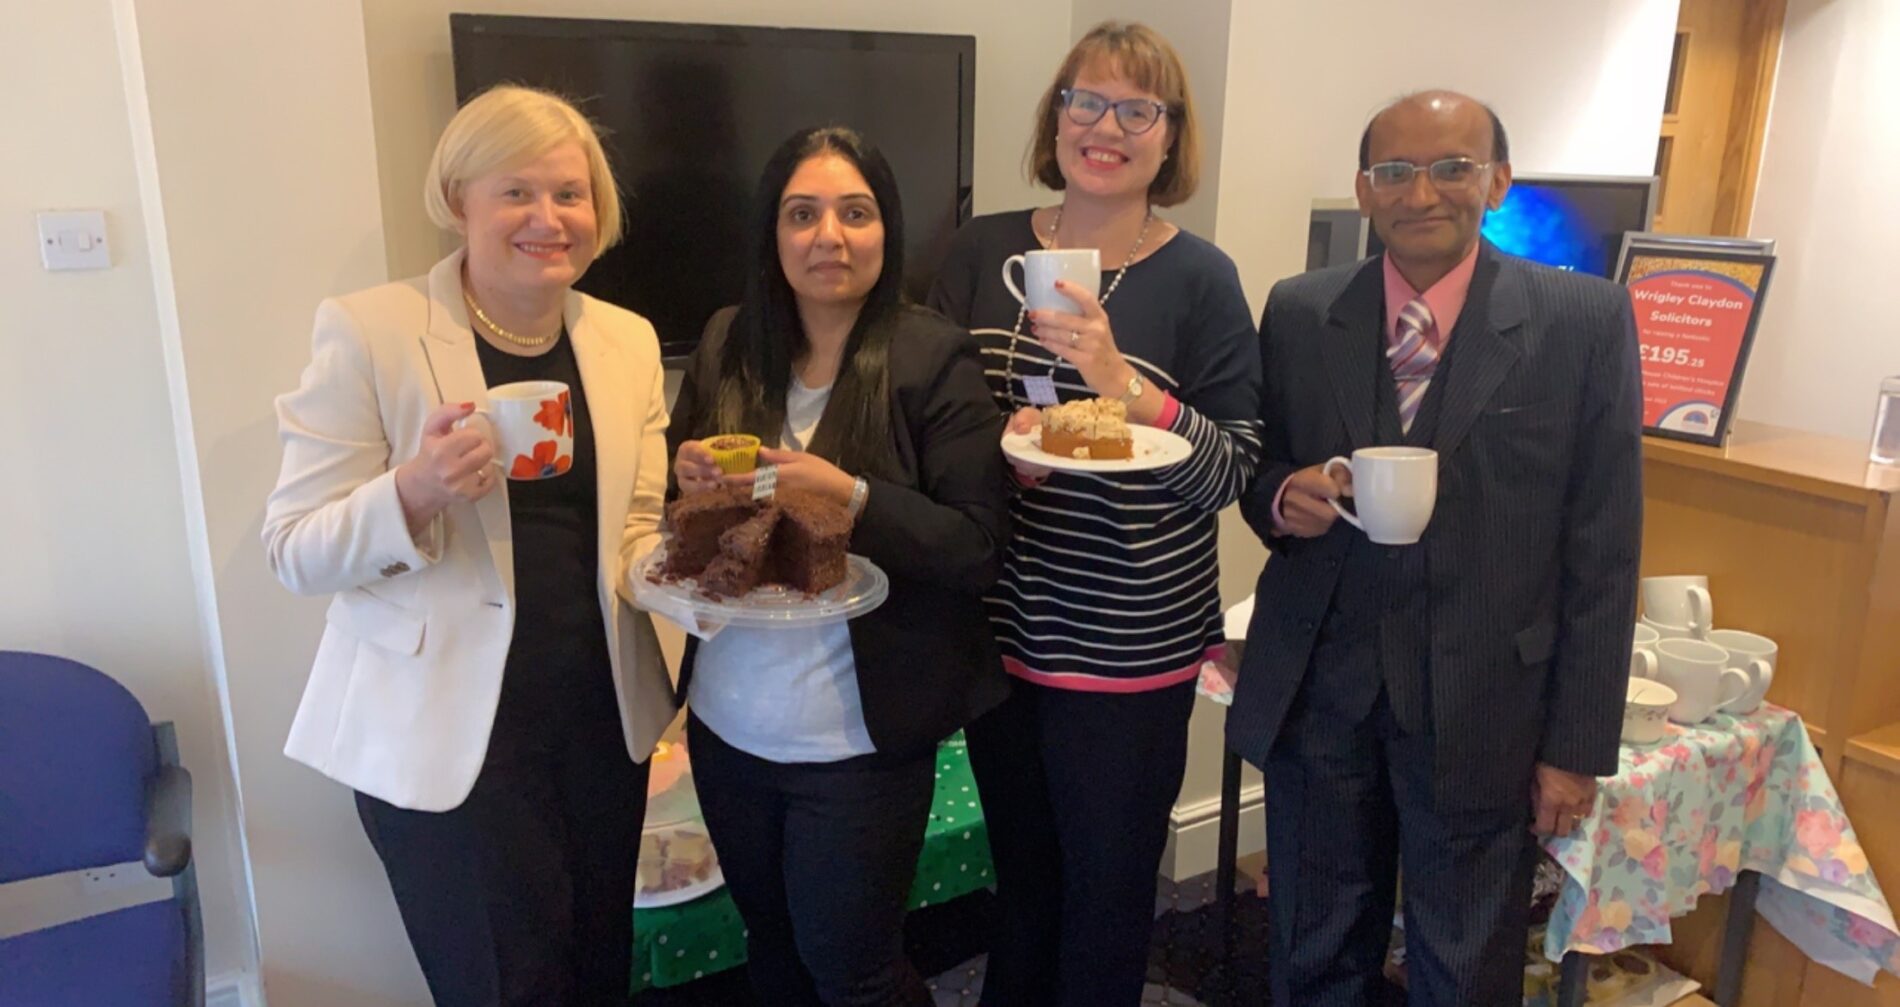 macmillan coffee morning 2022 september wrigley claydon solicitors oldham manchester todmorden partners